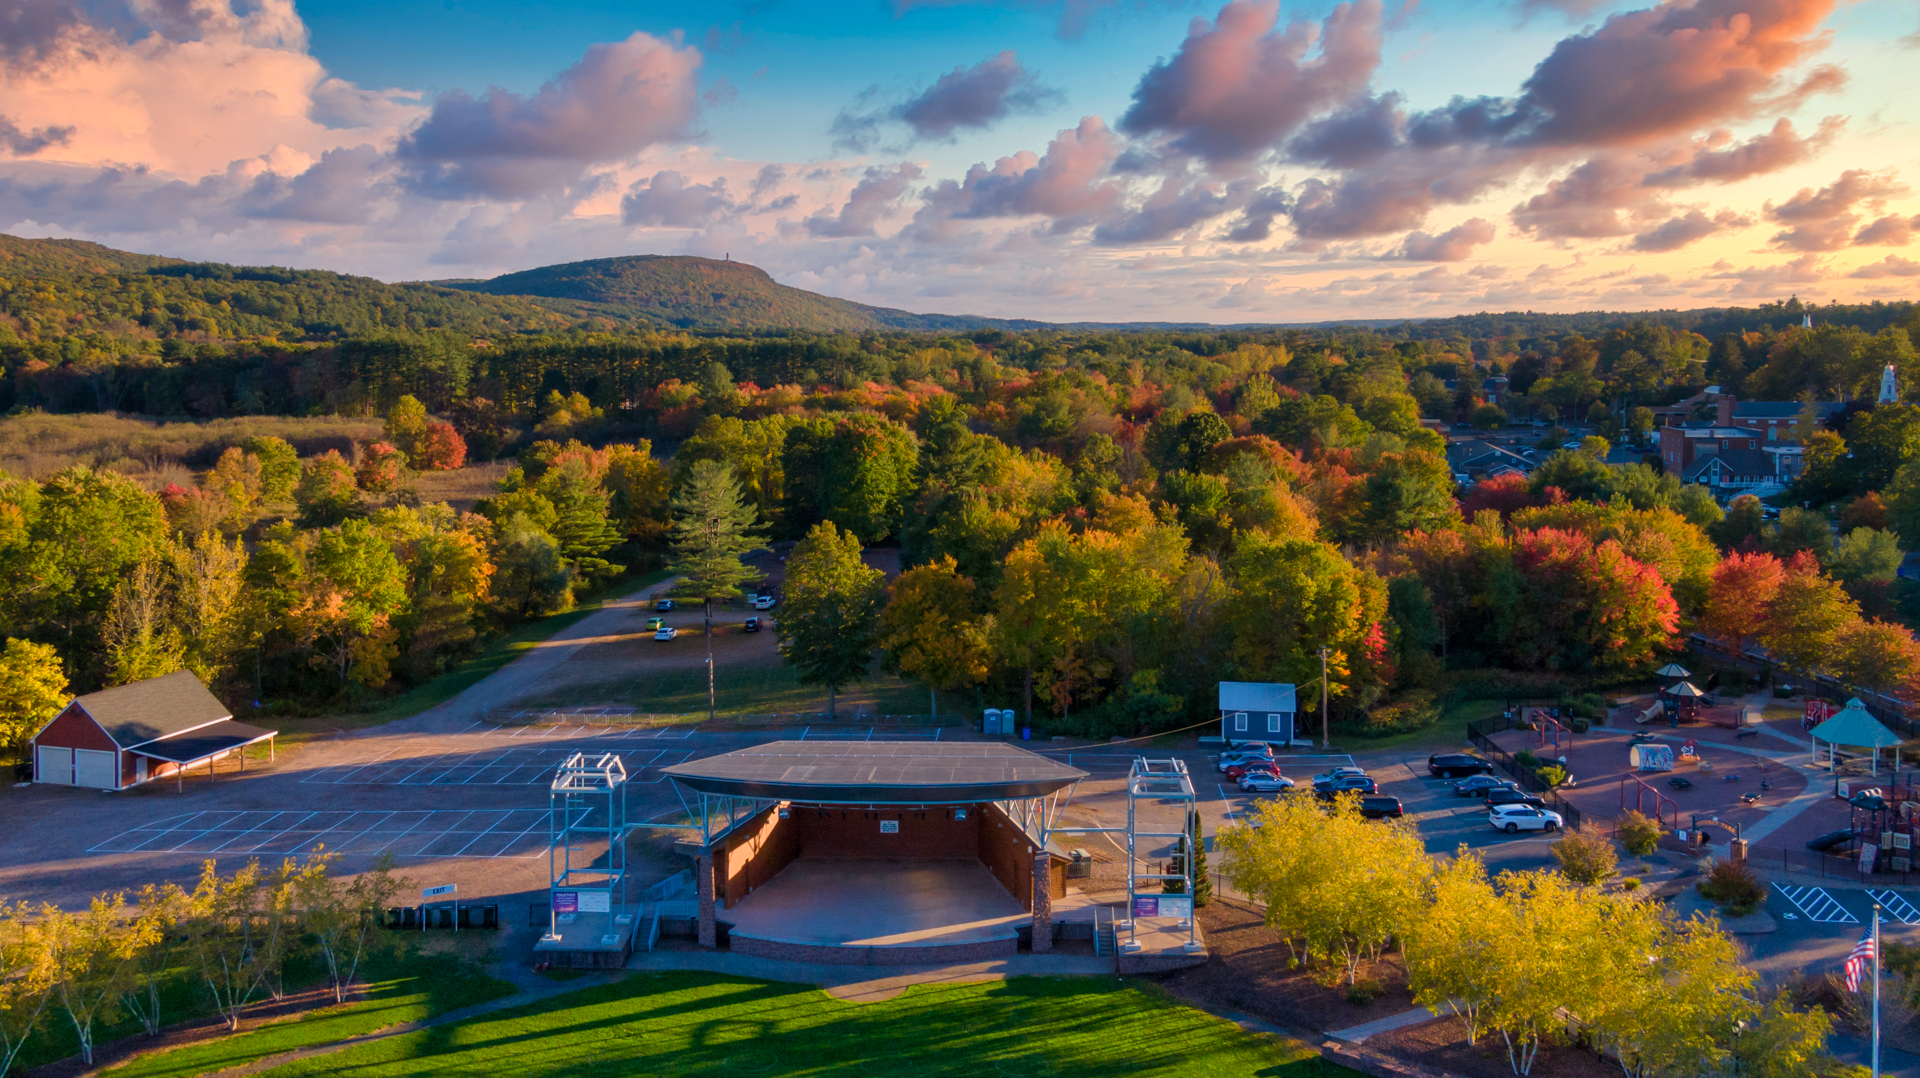 Simsbury Meadows Performing Arts Center at Sunset